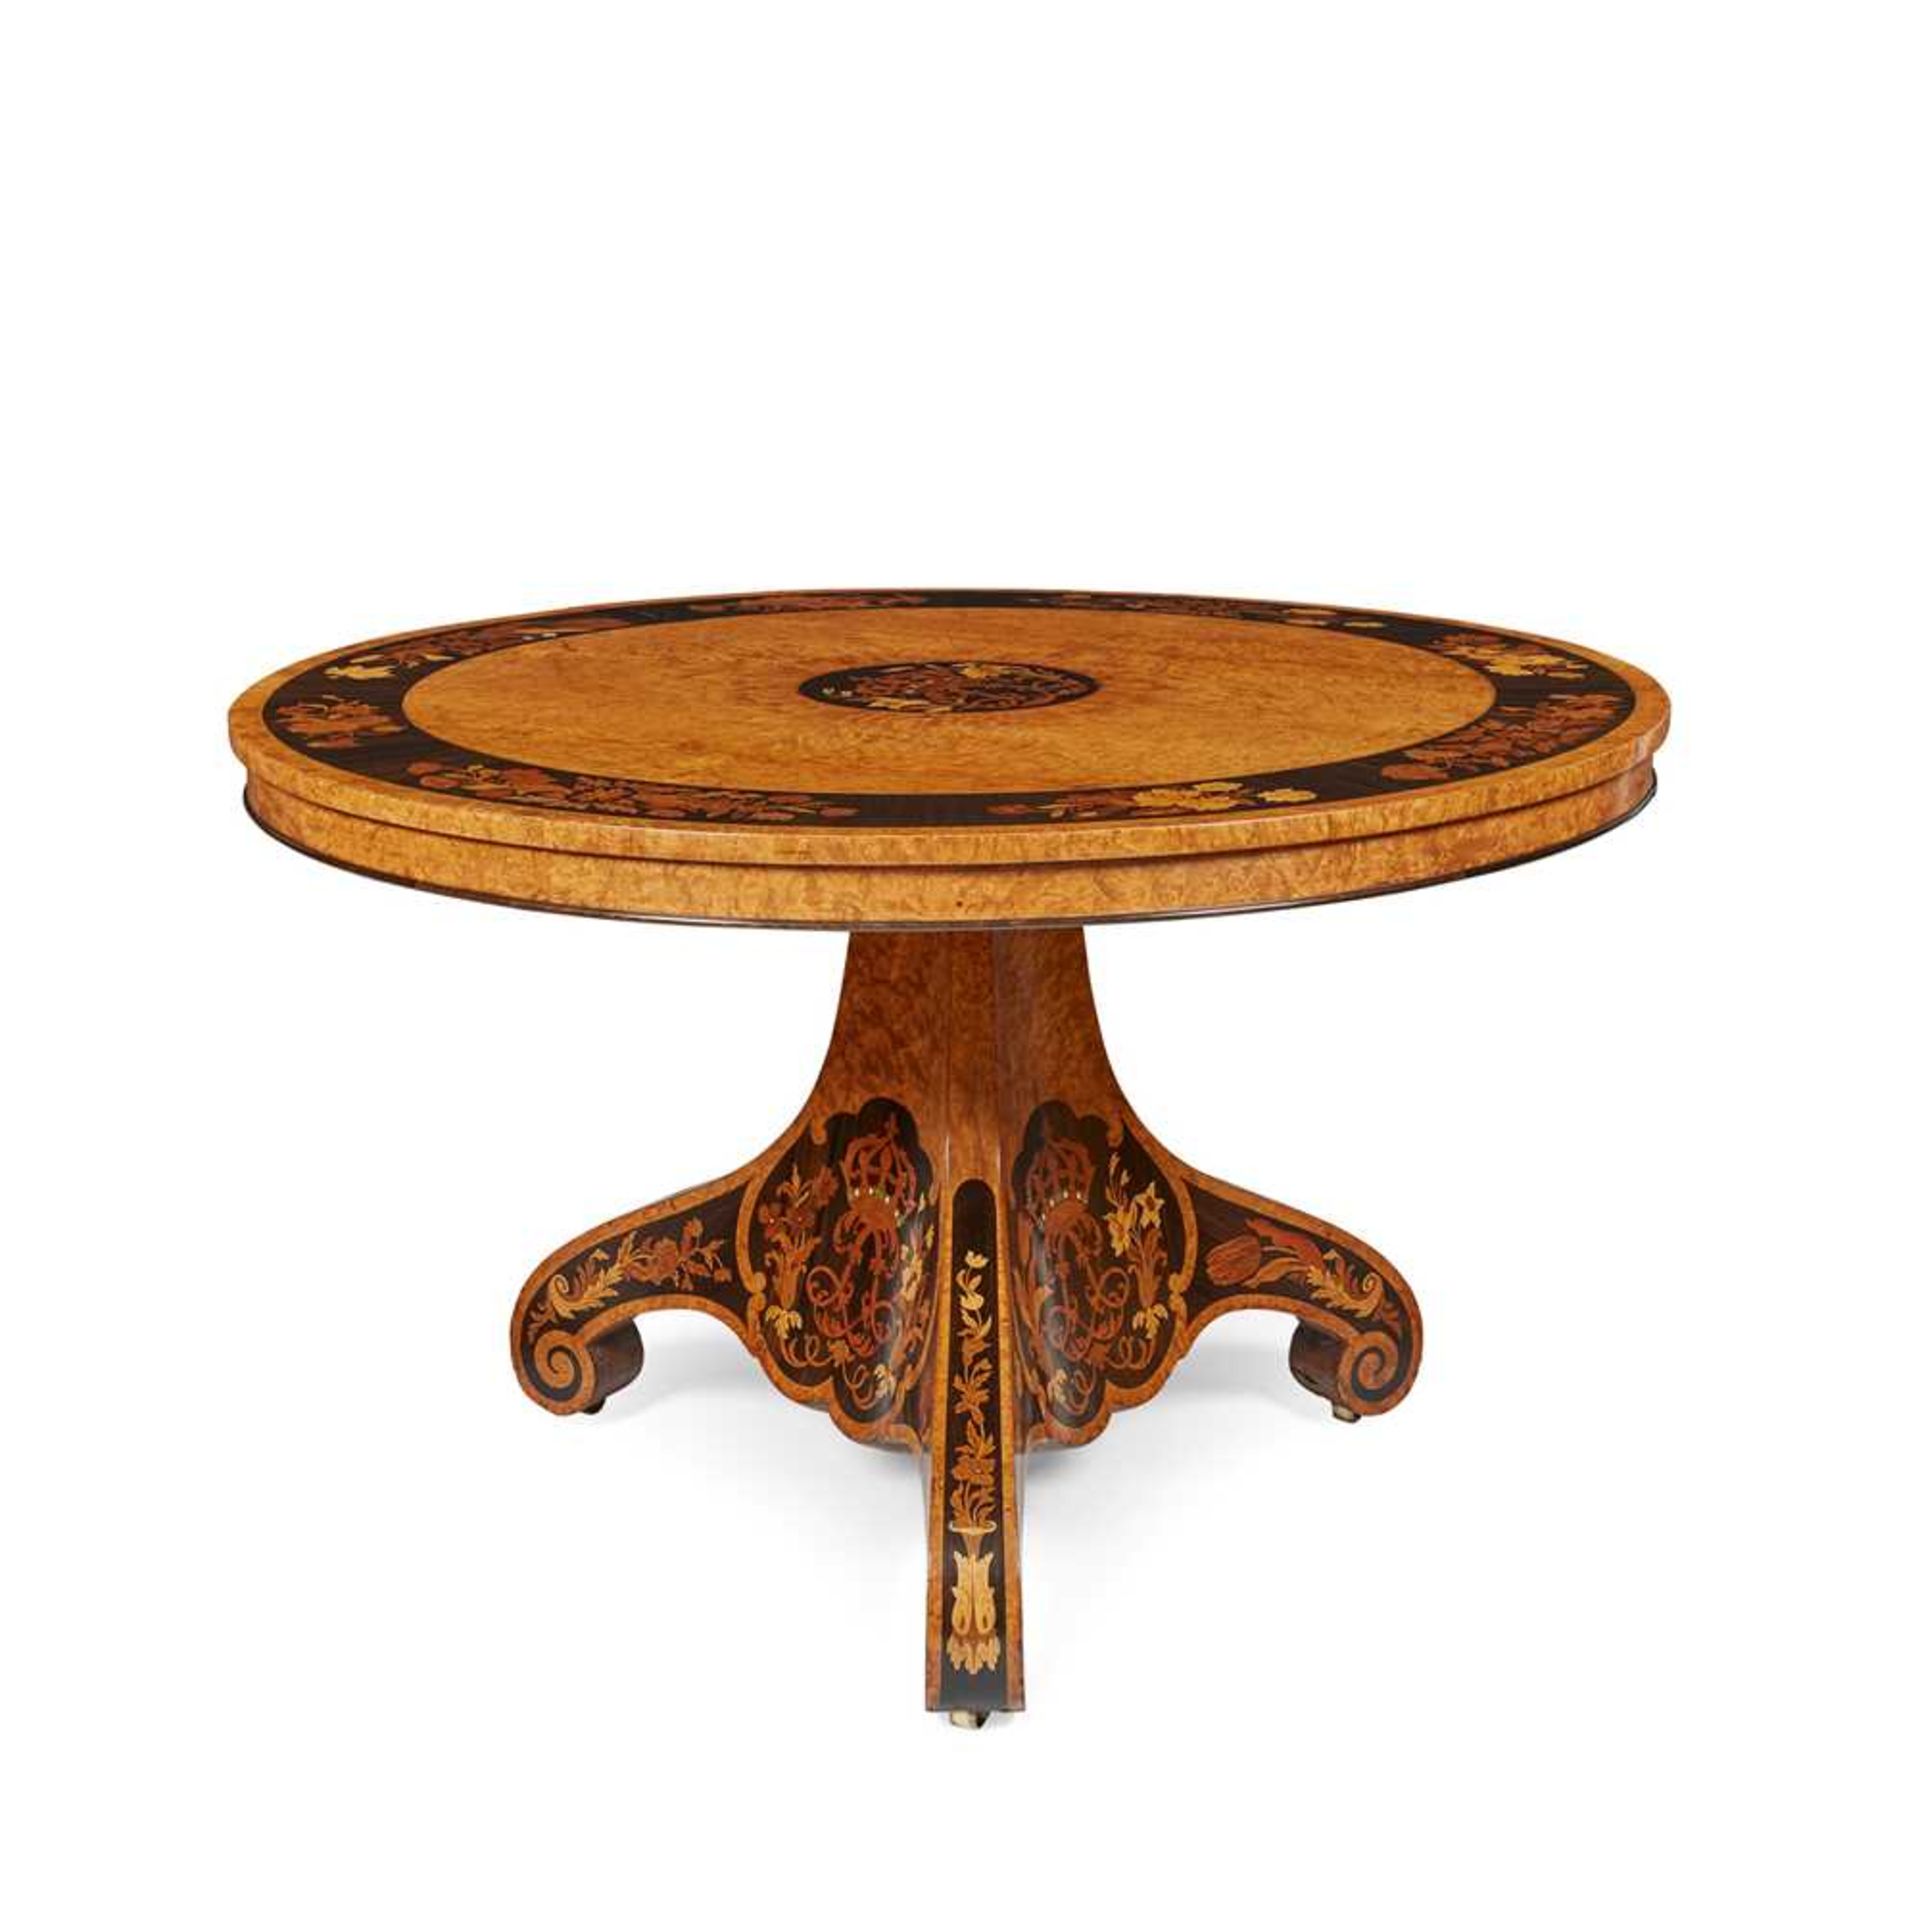 KING LOUIS-PHILIPPE'S AMBOYNA, WALNUT, IVORY AND EBONY MARQUETRY CENTRE TABLE, ATTRIBUTED TO GEORGE - Image 2 of 5